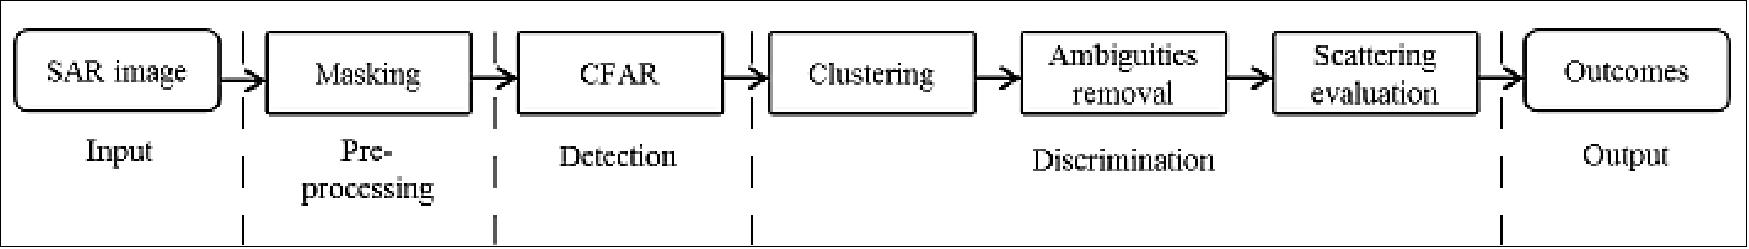 Figure 22: Ship detection flow-chart. The rounded rectangles represents input and output data, while the rectangles are all the processes needed to perform the algorithm. The scheme is divided into three sections: pre-processing (masking), detection (CFAR) and discrimination (clustering, ambiguities removal and scattering evaluation), image credit: SSC, SSTL